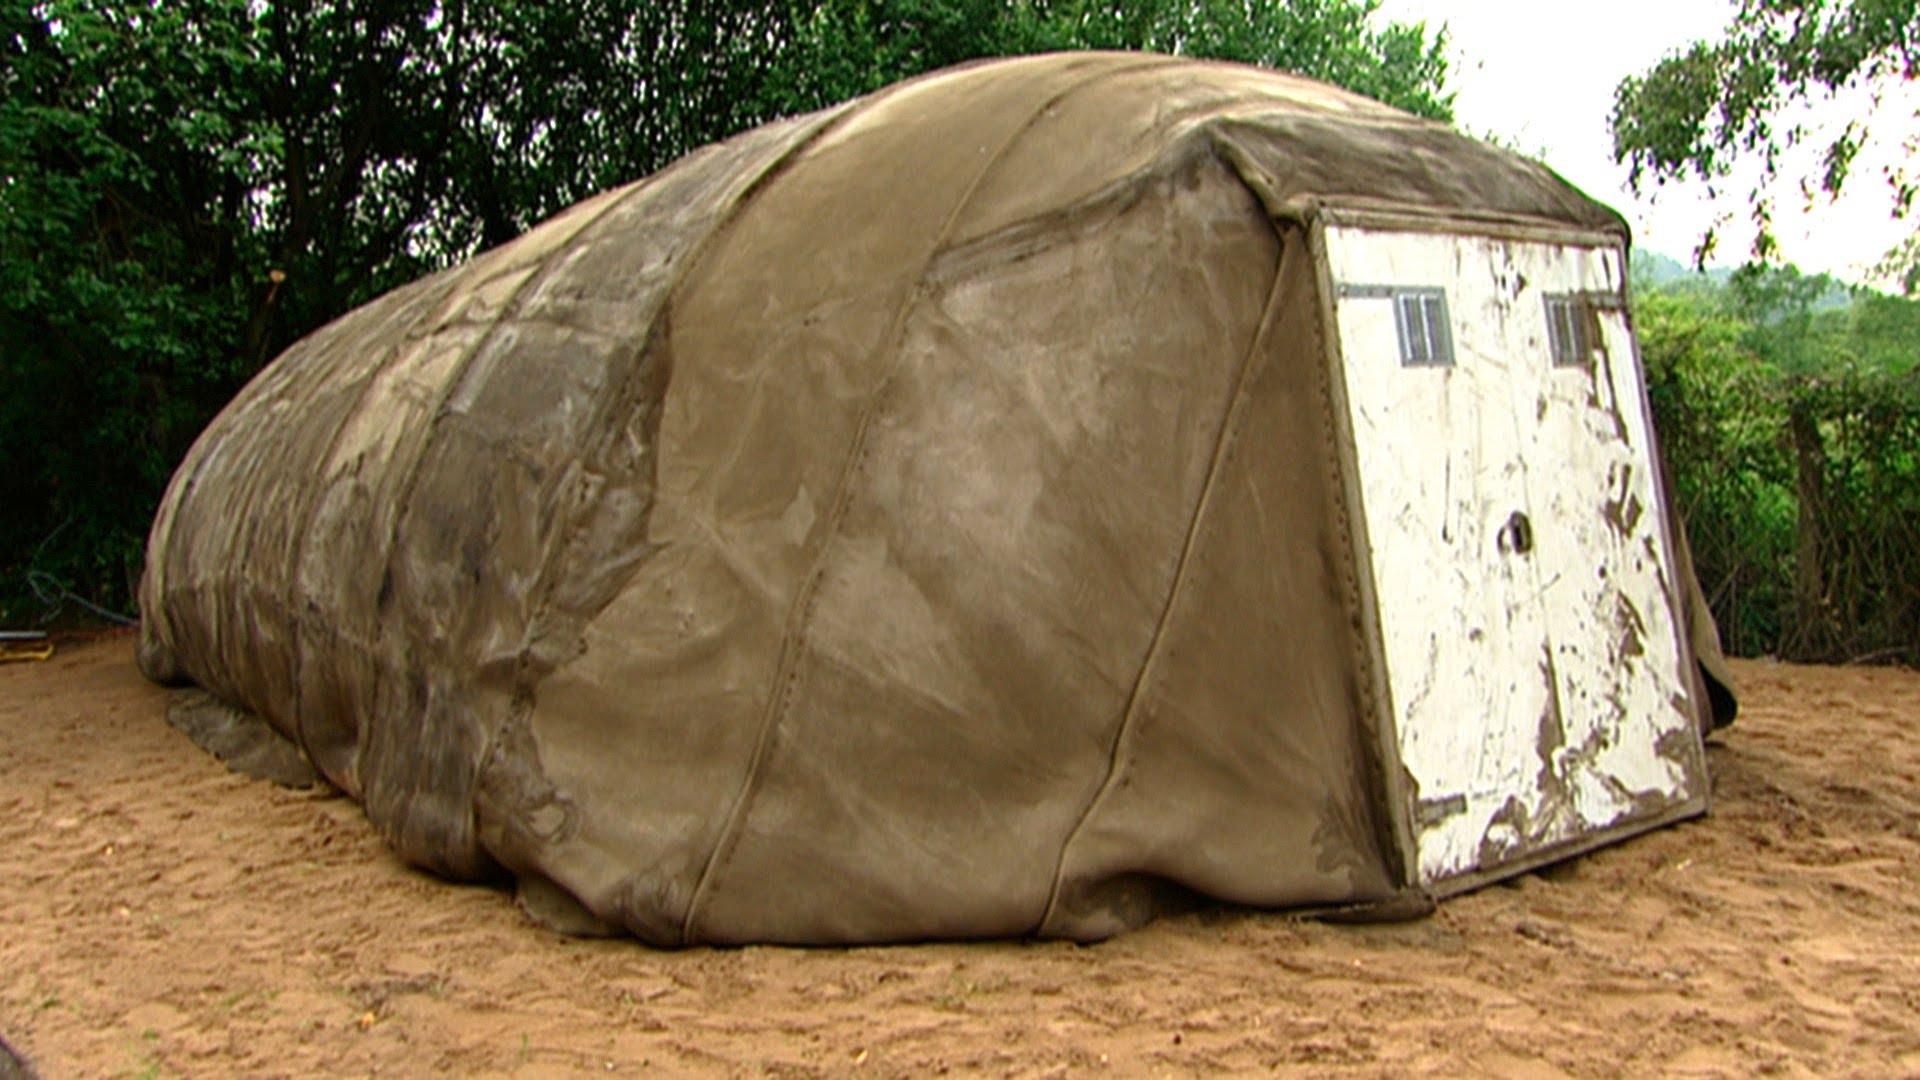 Concrete Tent That Inflates